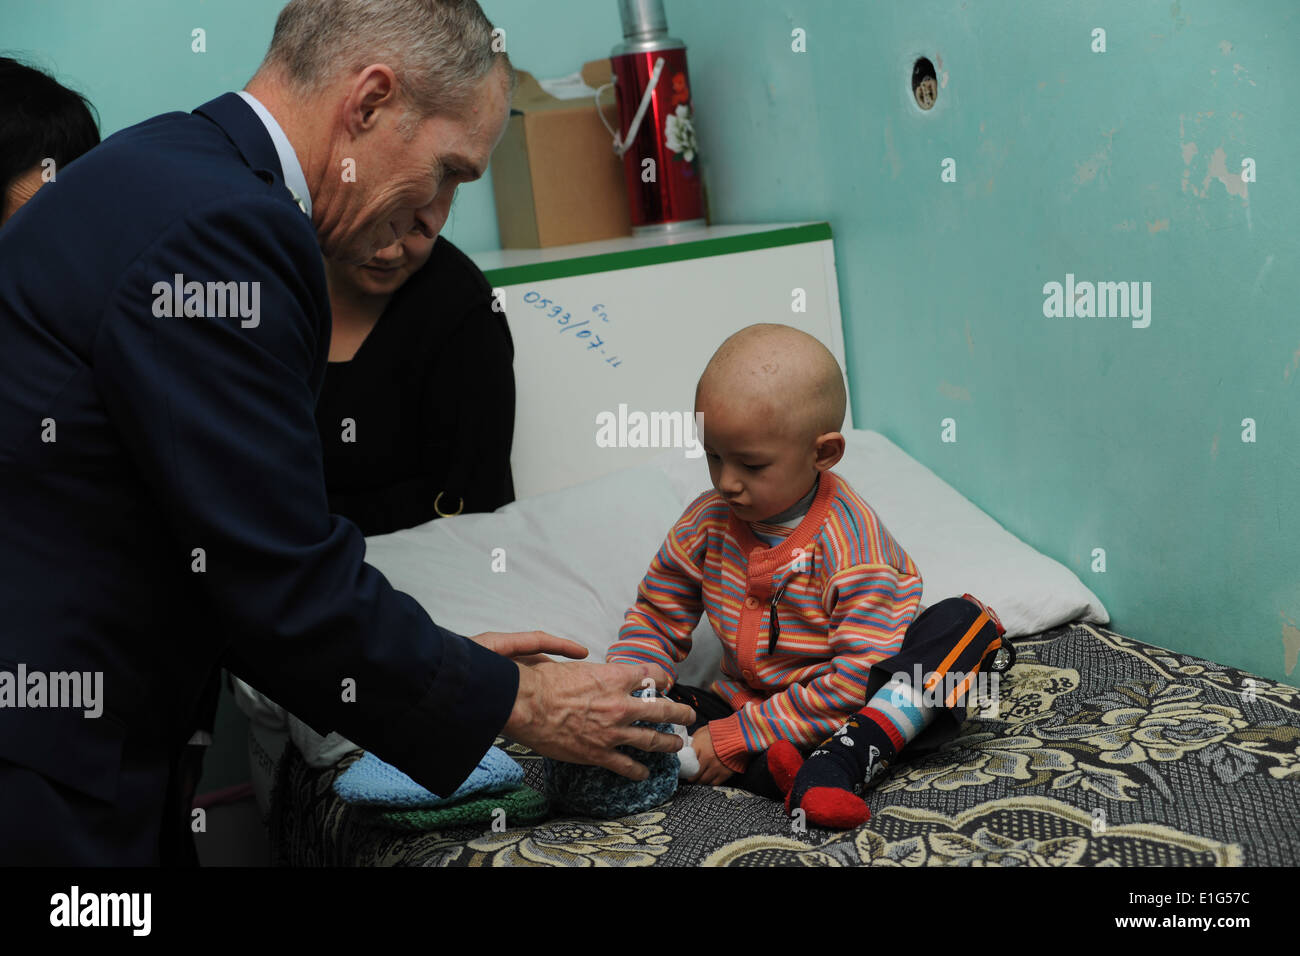 U.S. Air Force Lt. Gen. Mike Hostage, the commander of U.S. Air Forces Central, visits with a patient at the Children's Cancer Stock Photo